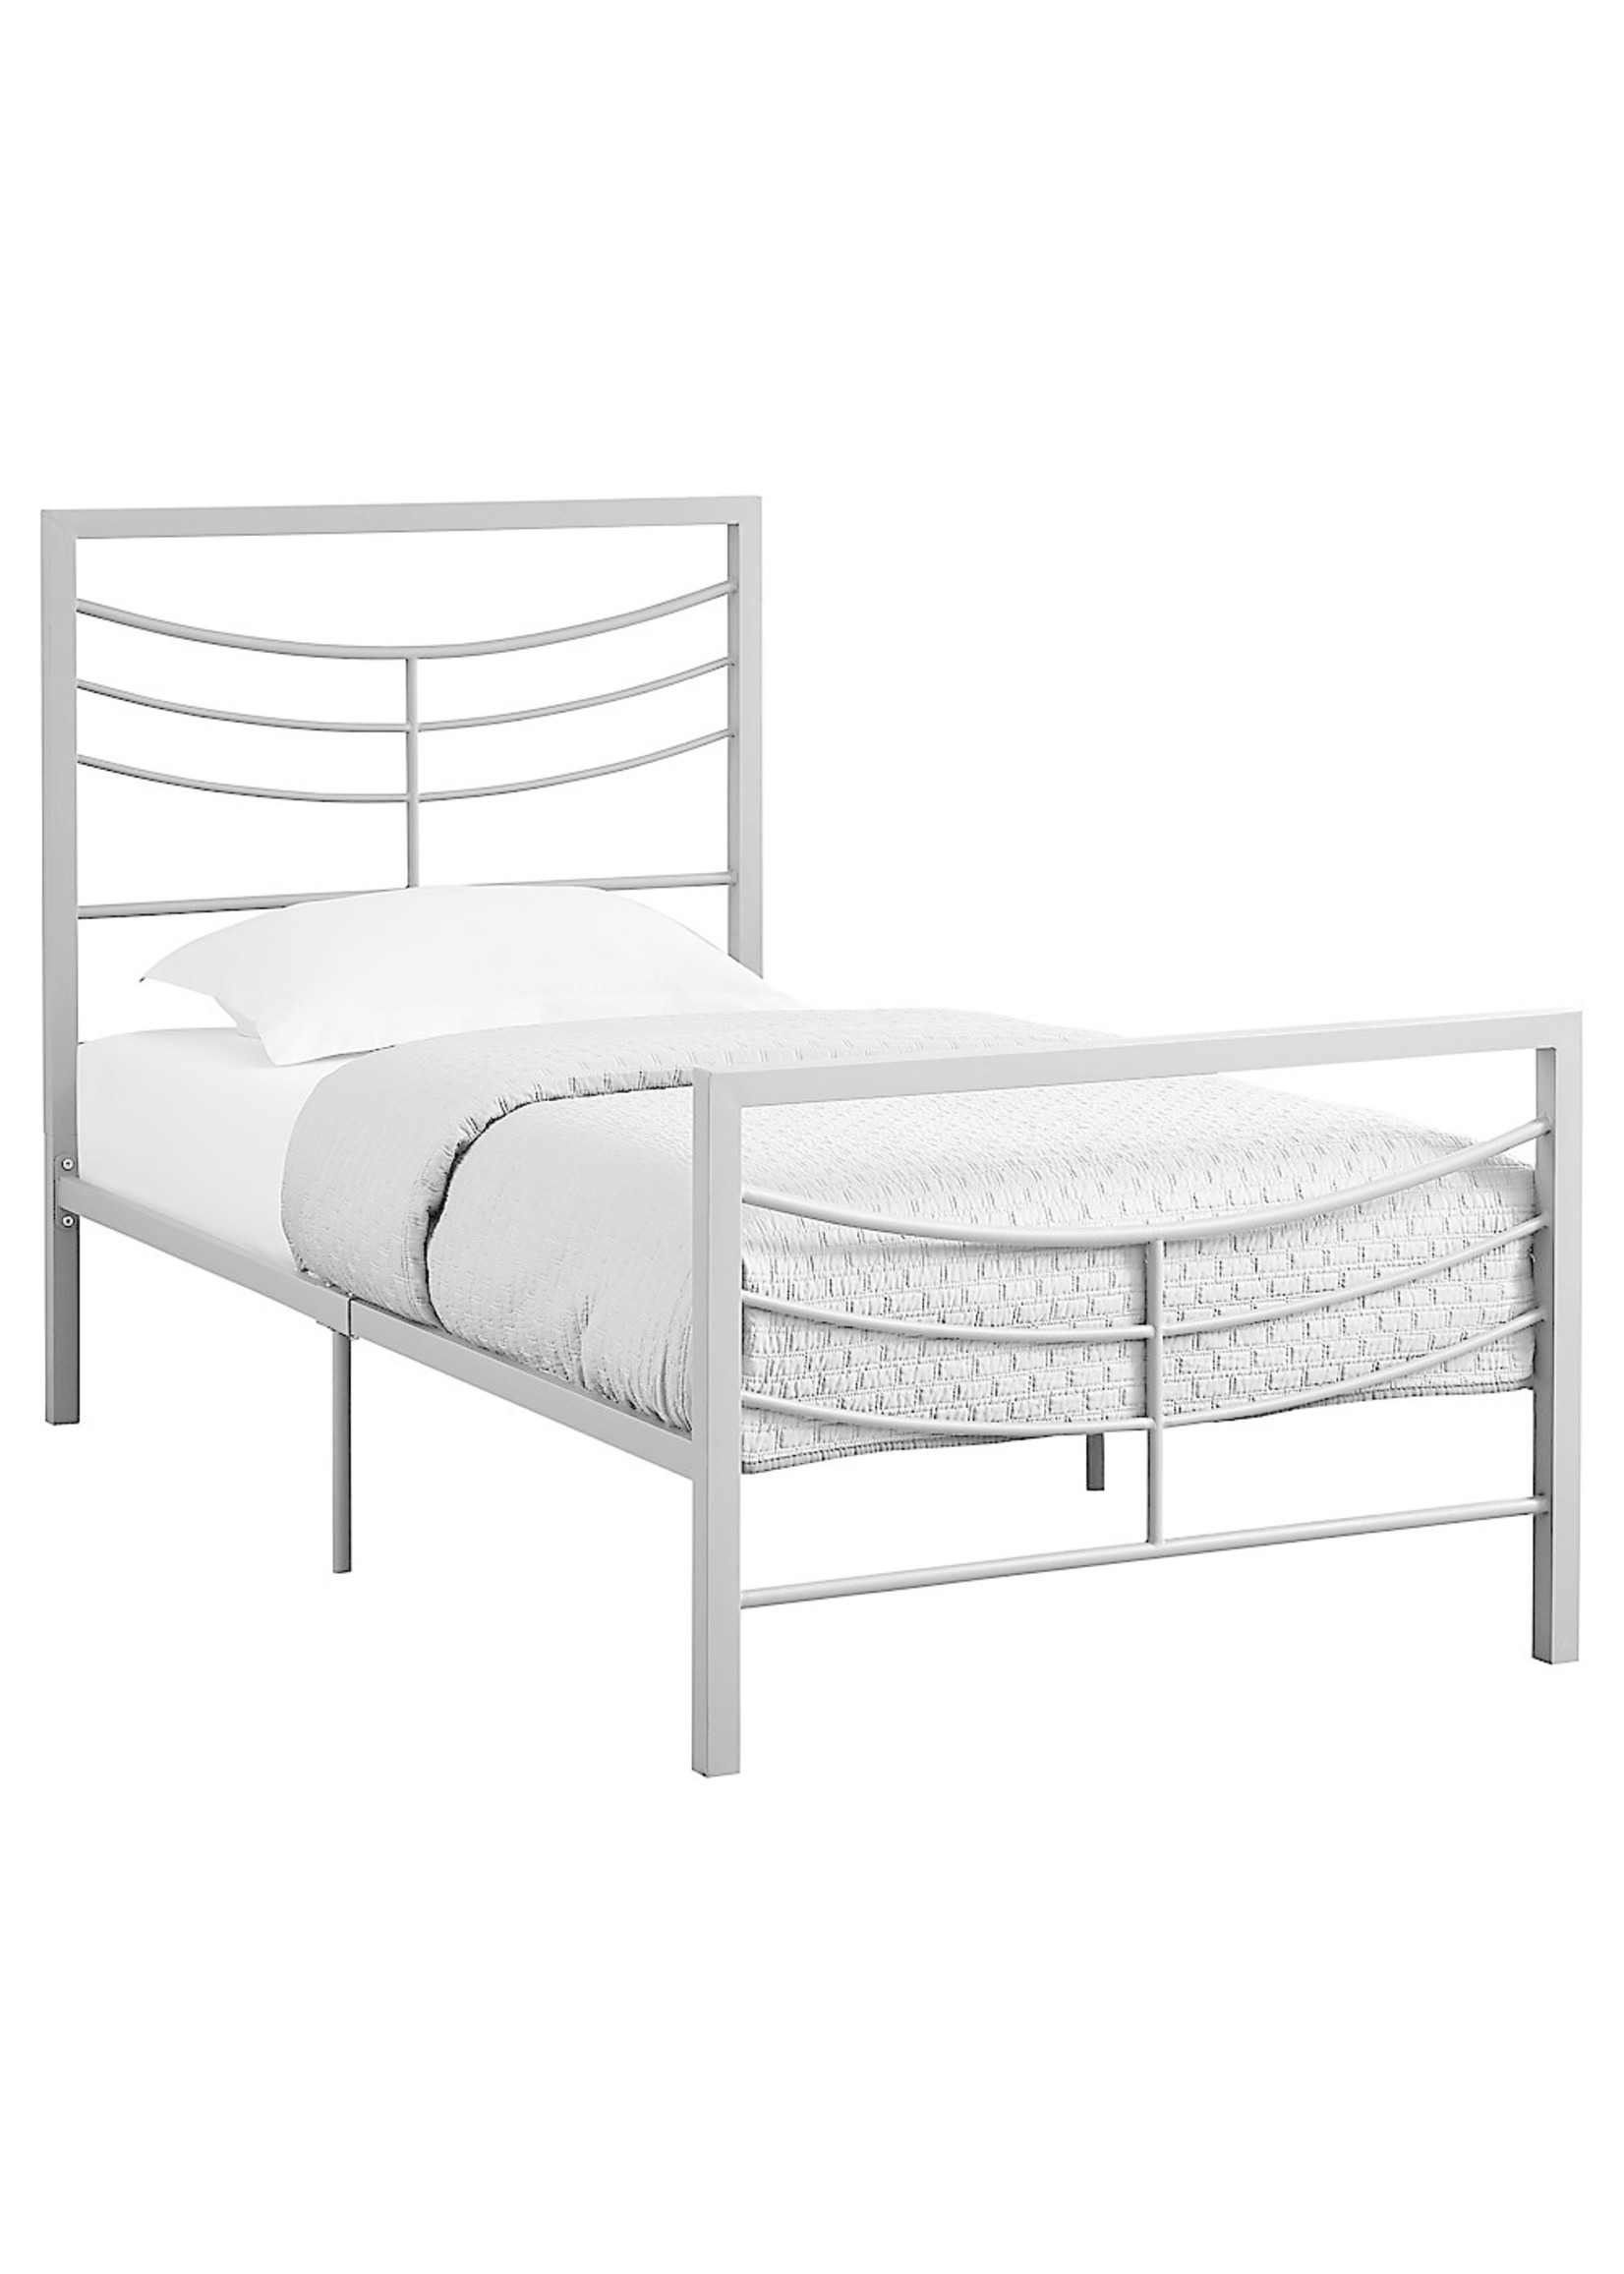 BED - TWIN SIZE / GREY METAL FRAME ONLY